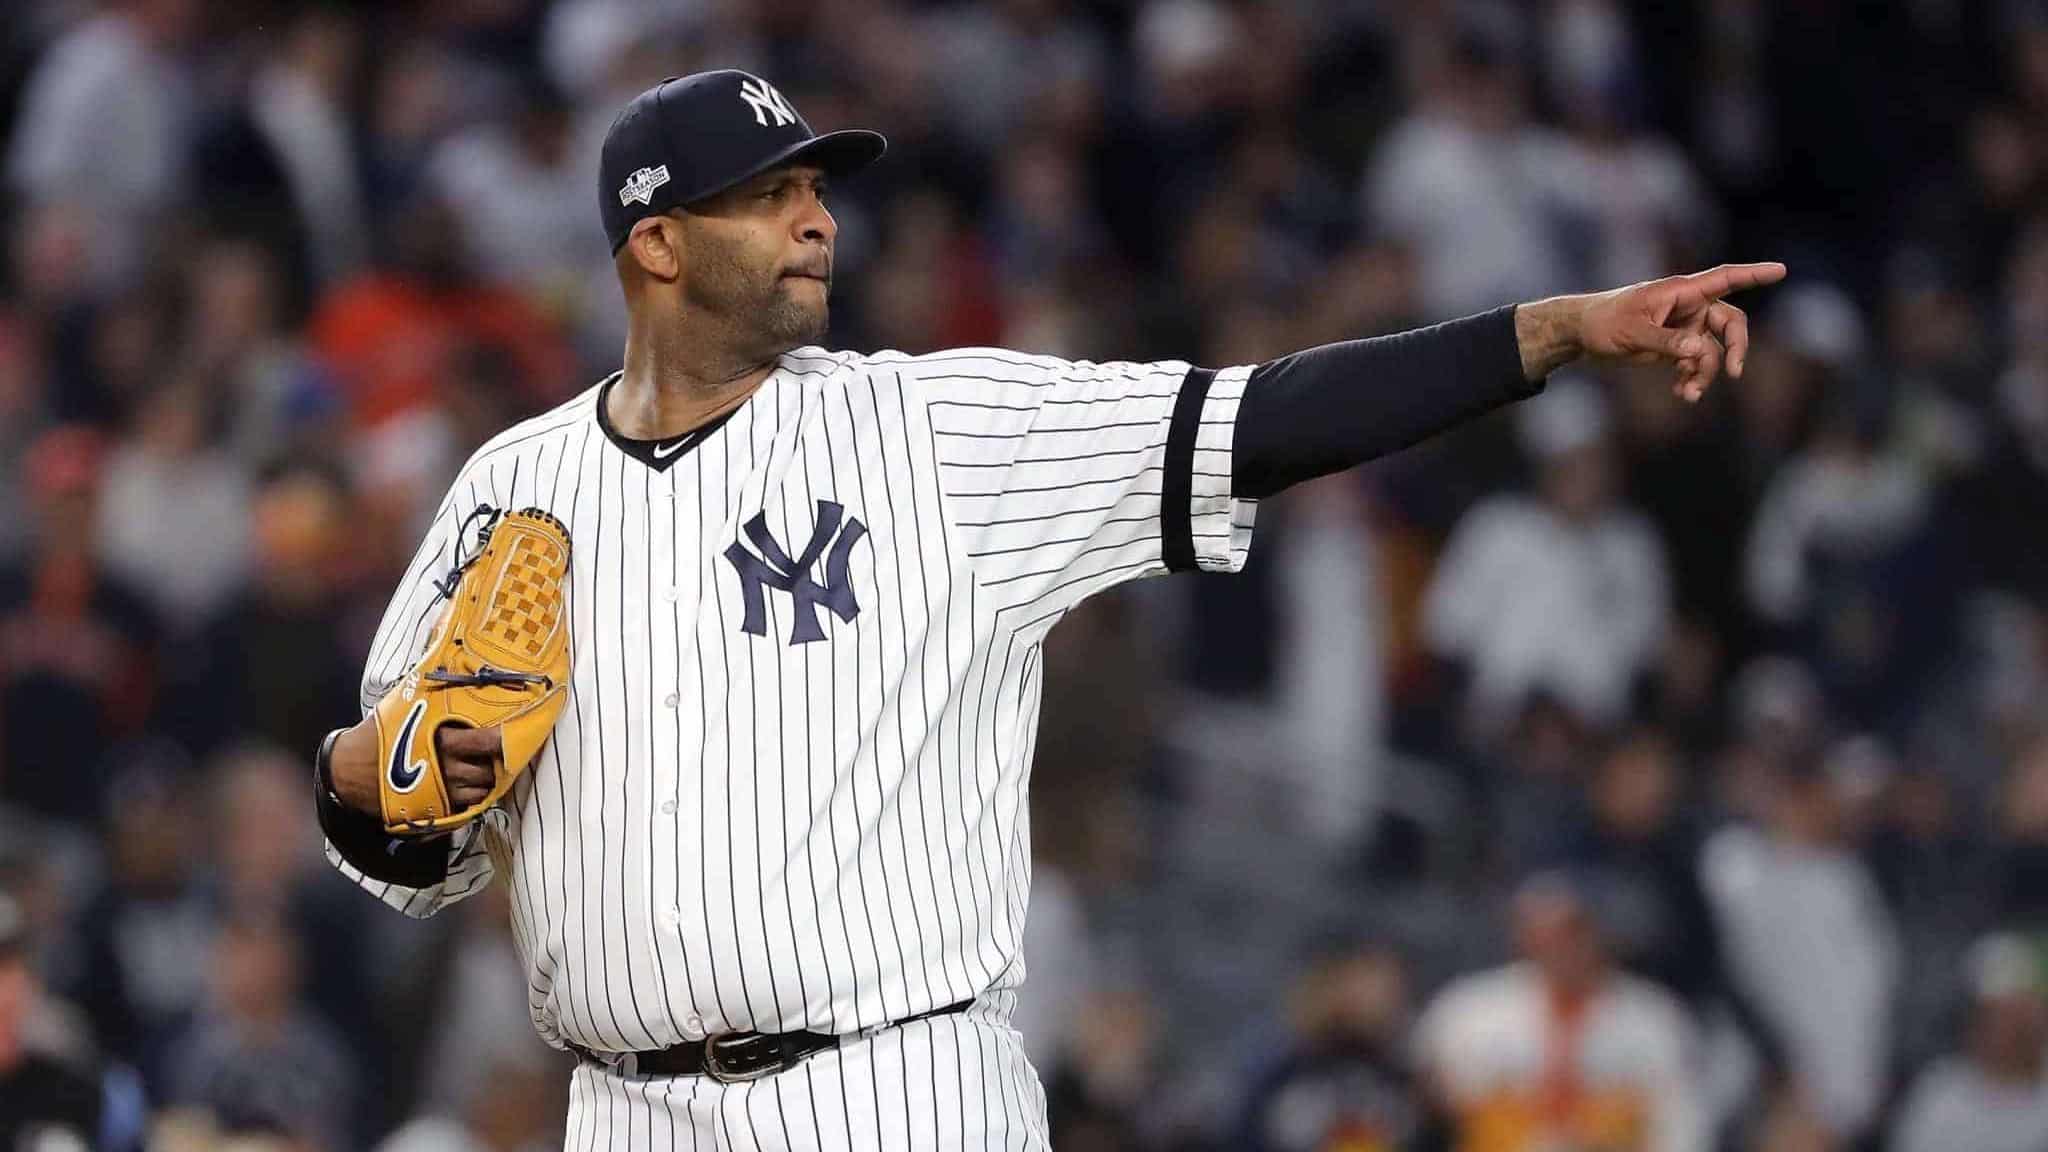 NEW YORK, NEW YORK - OCTOBER 17: CC Sabathia #52 of the New York Yankees reacts against the Houston Astros during the eighth inning in game four of the American League Championship Series at Yankee Stadium on October 17, 2019 in New York City.